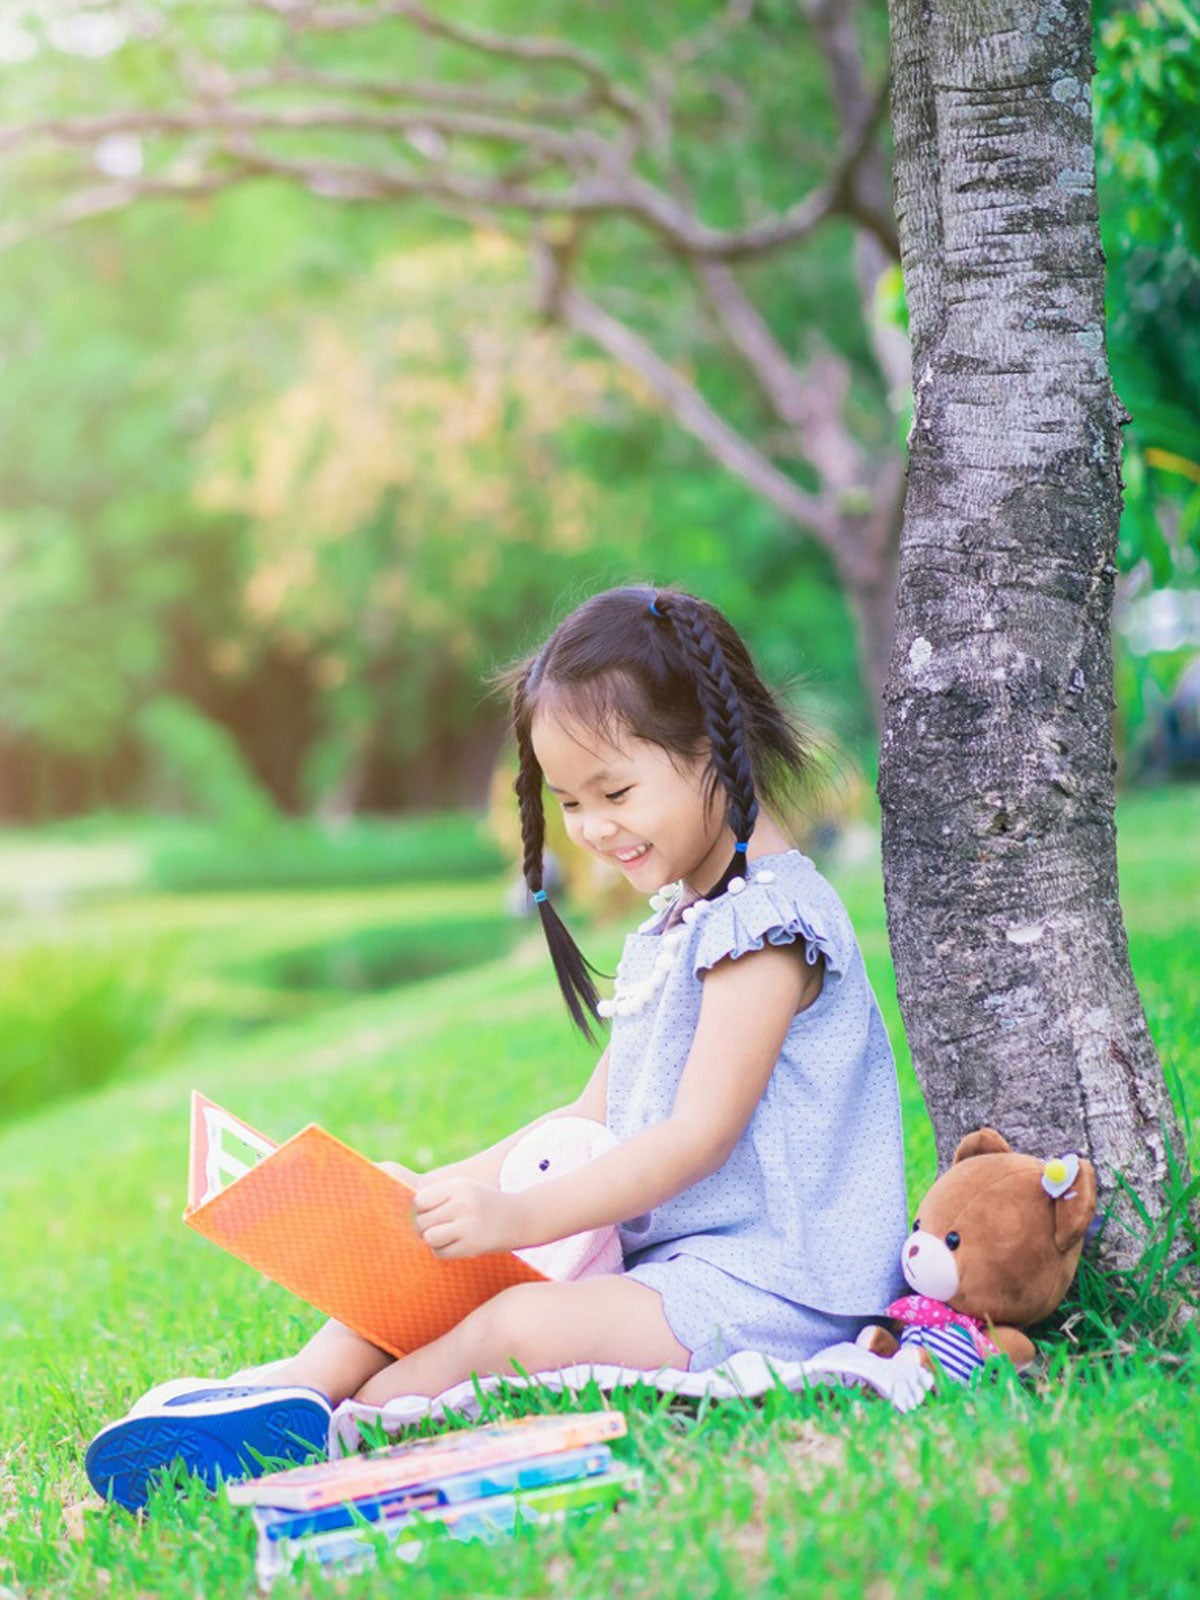 A smiling girl with stuffed animals reads a book under a tree